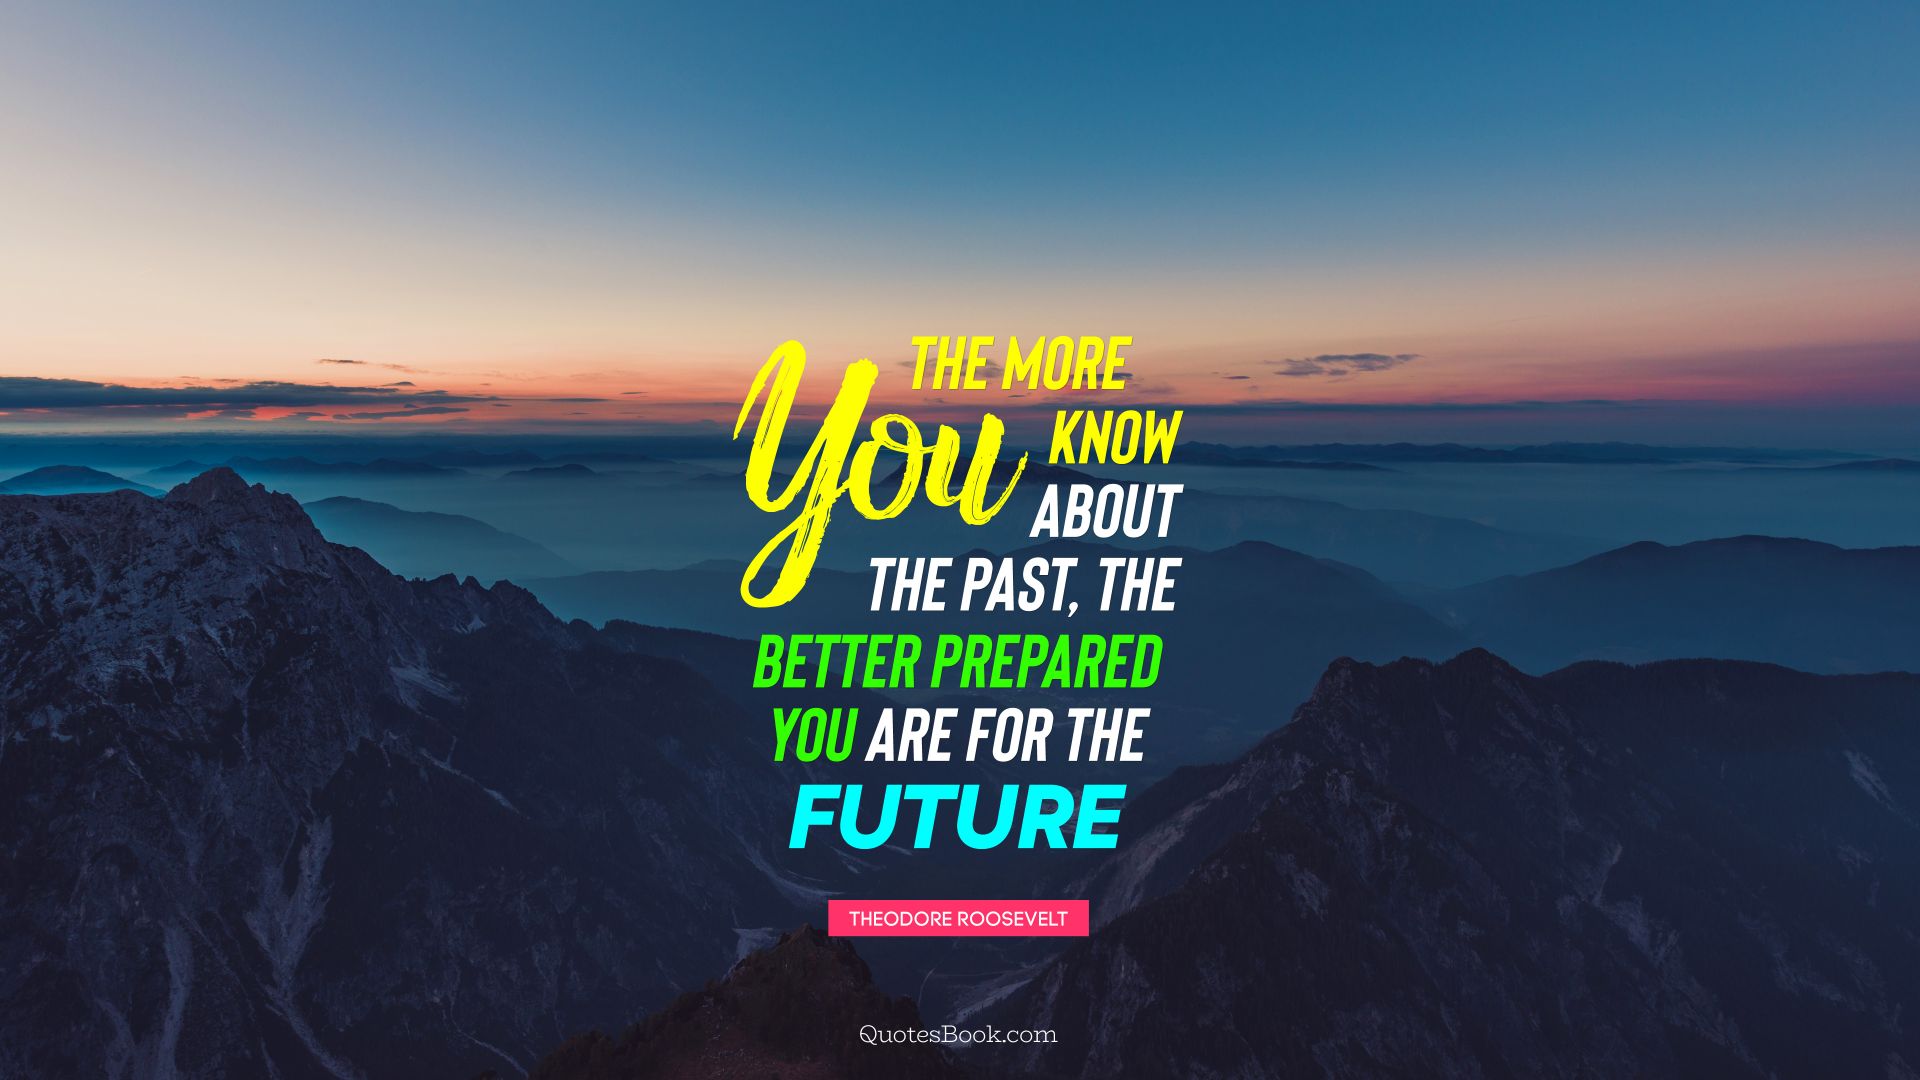 The more you know about the past, the better prepared you are for the future. - Quote by Theodore Roosevelt